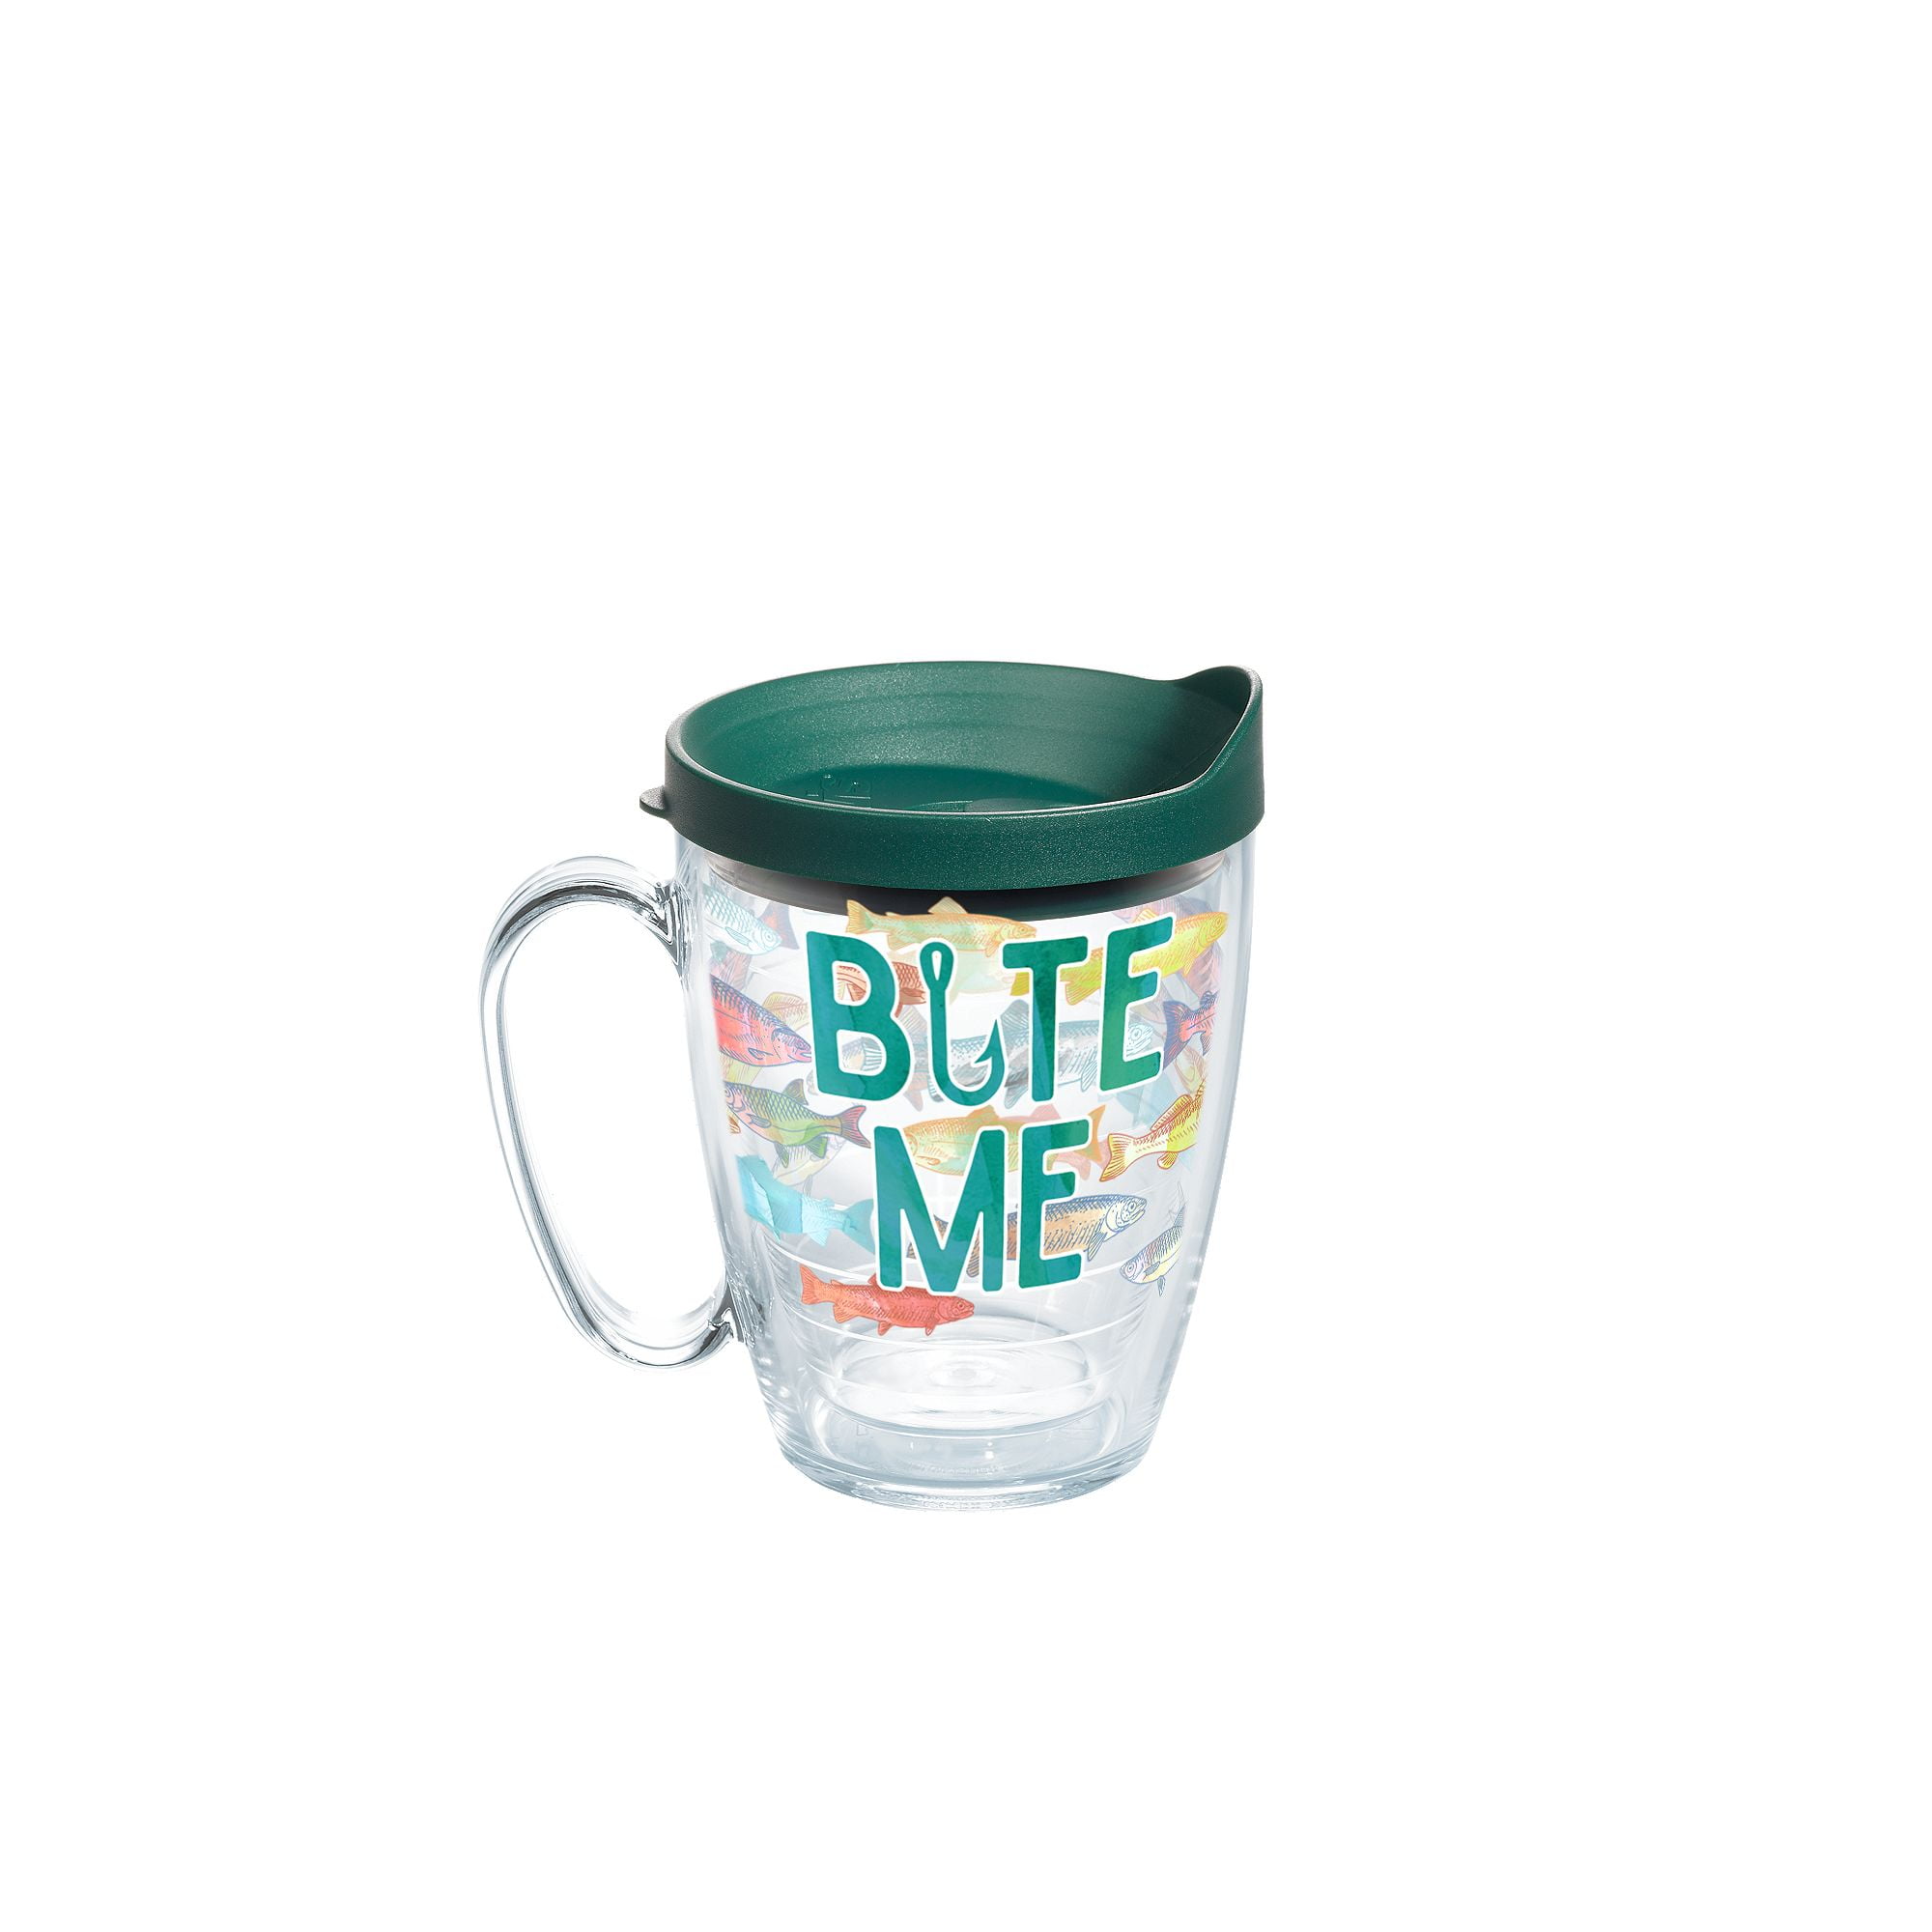 Tervis Bite Me Bait Fishing Made in USA Double Walled Insulated Tumbler  Travel Cup Keeps Drinks Cold & Hot, 16oz Mug, Classic 